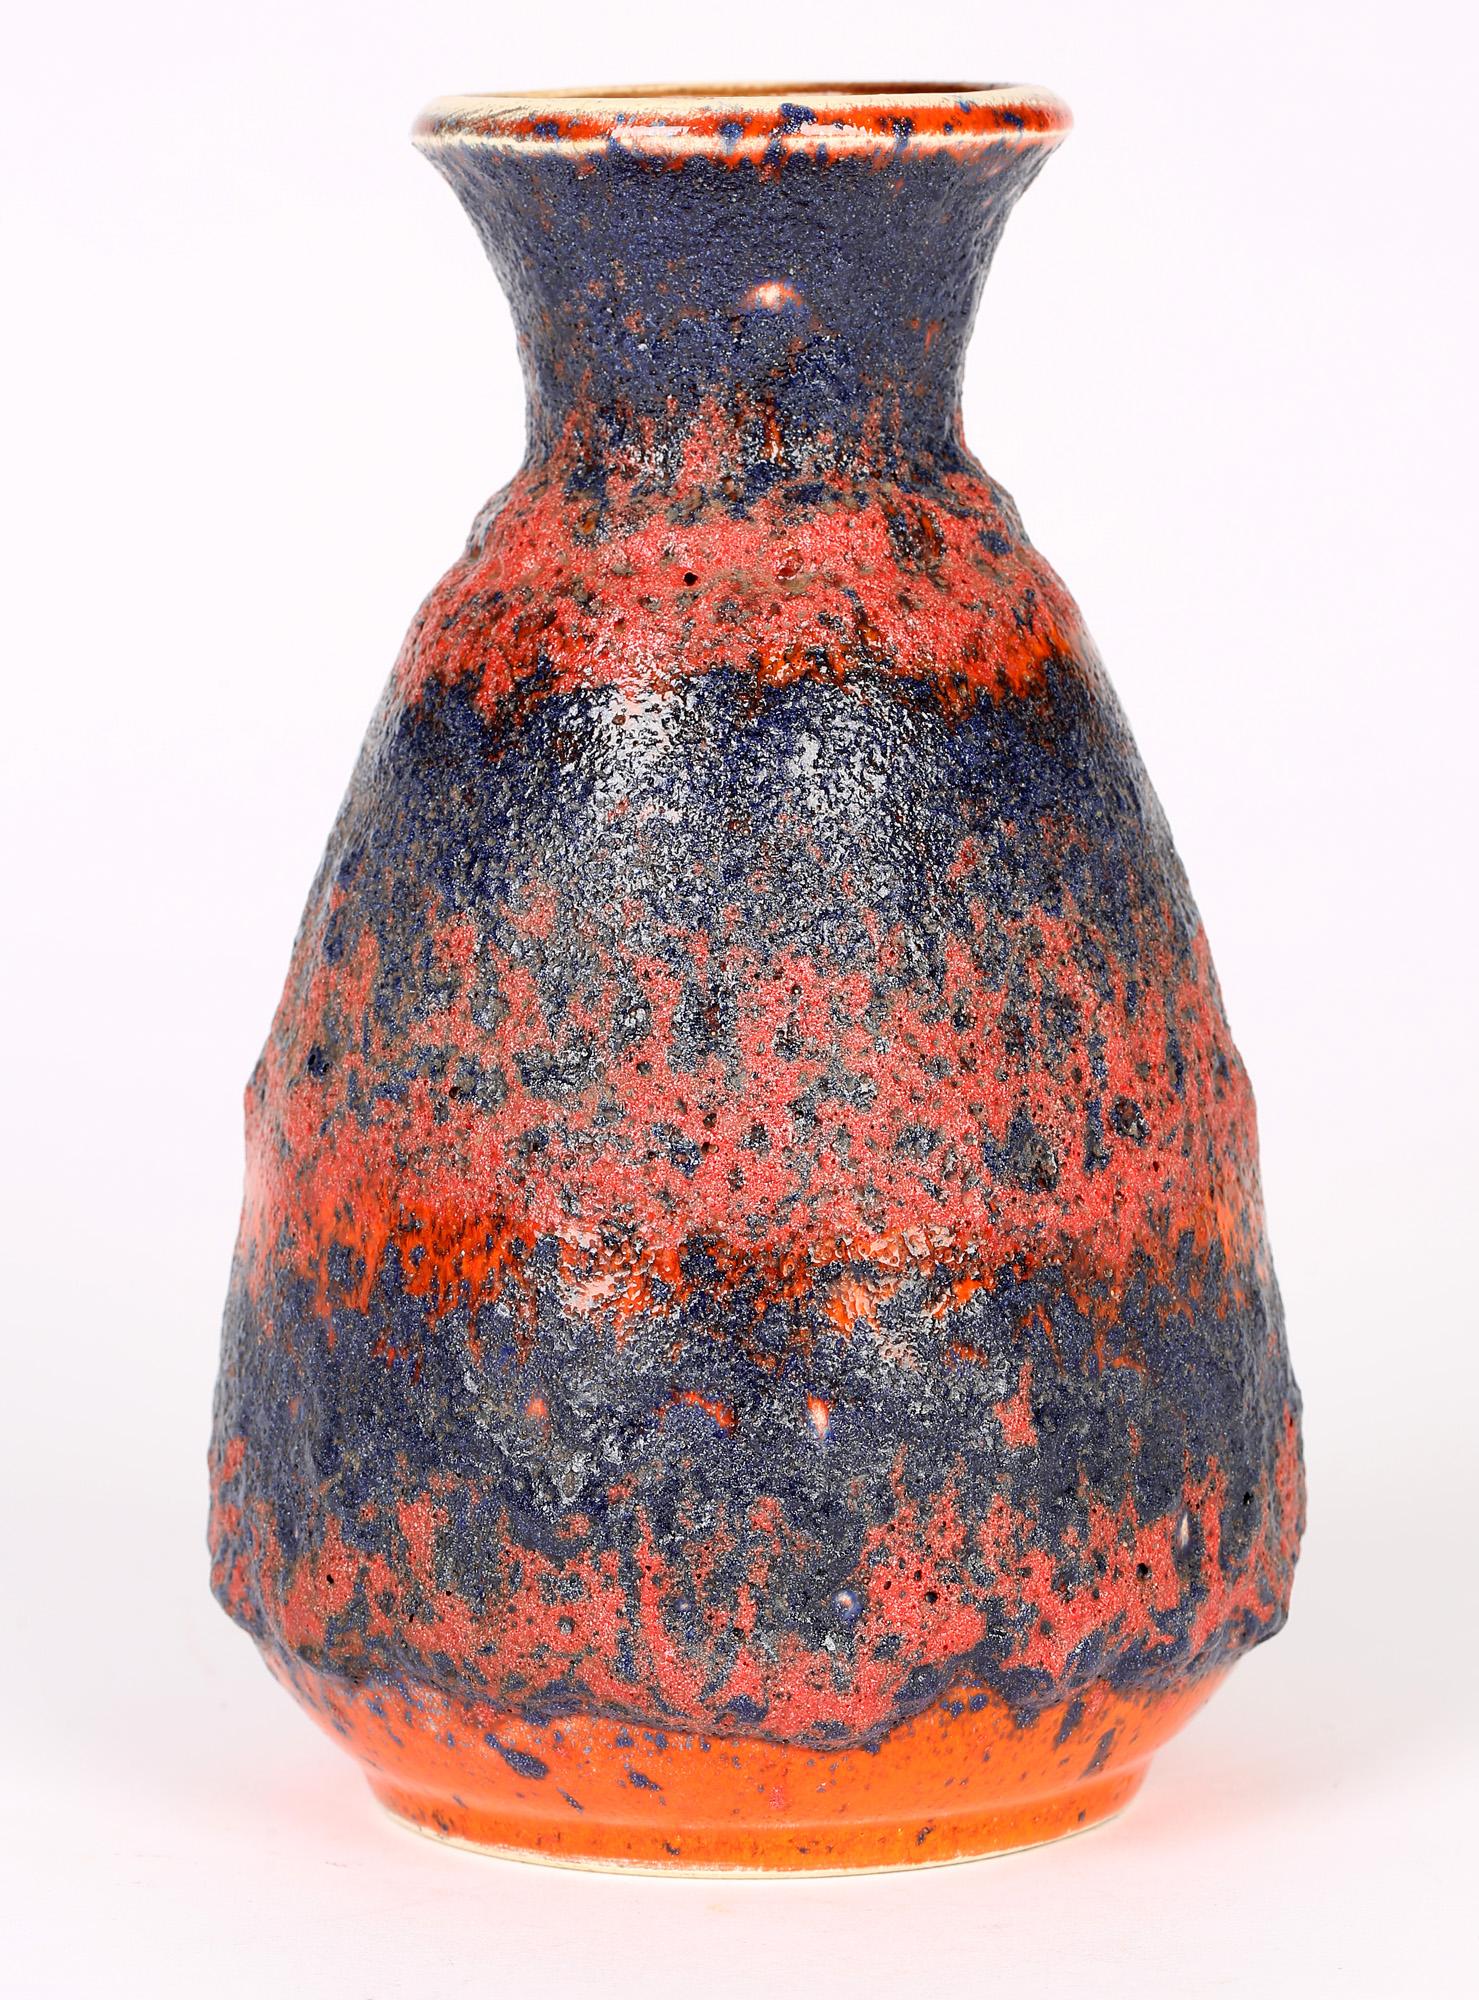 Hand-Crafted Bay Keramik West German Mid-Century Volcanic Fat Lava Glazed Art Pottery Vase For Sale